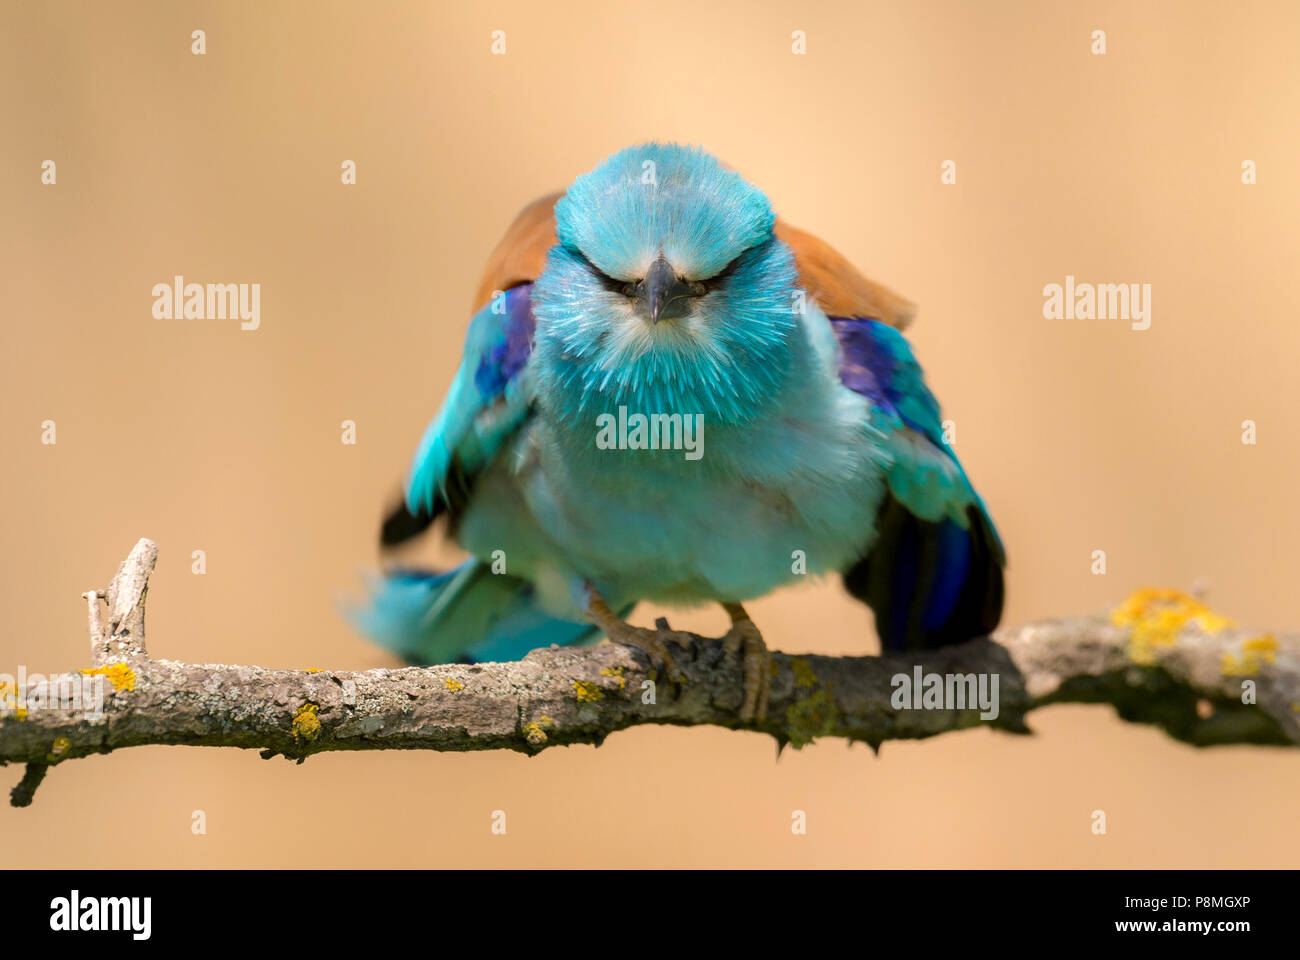 Roller shaking feathers on branch Stock Photo